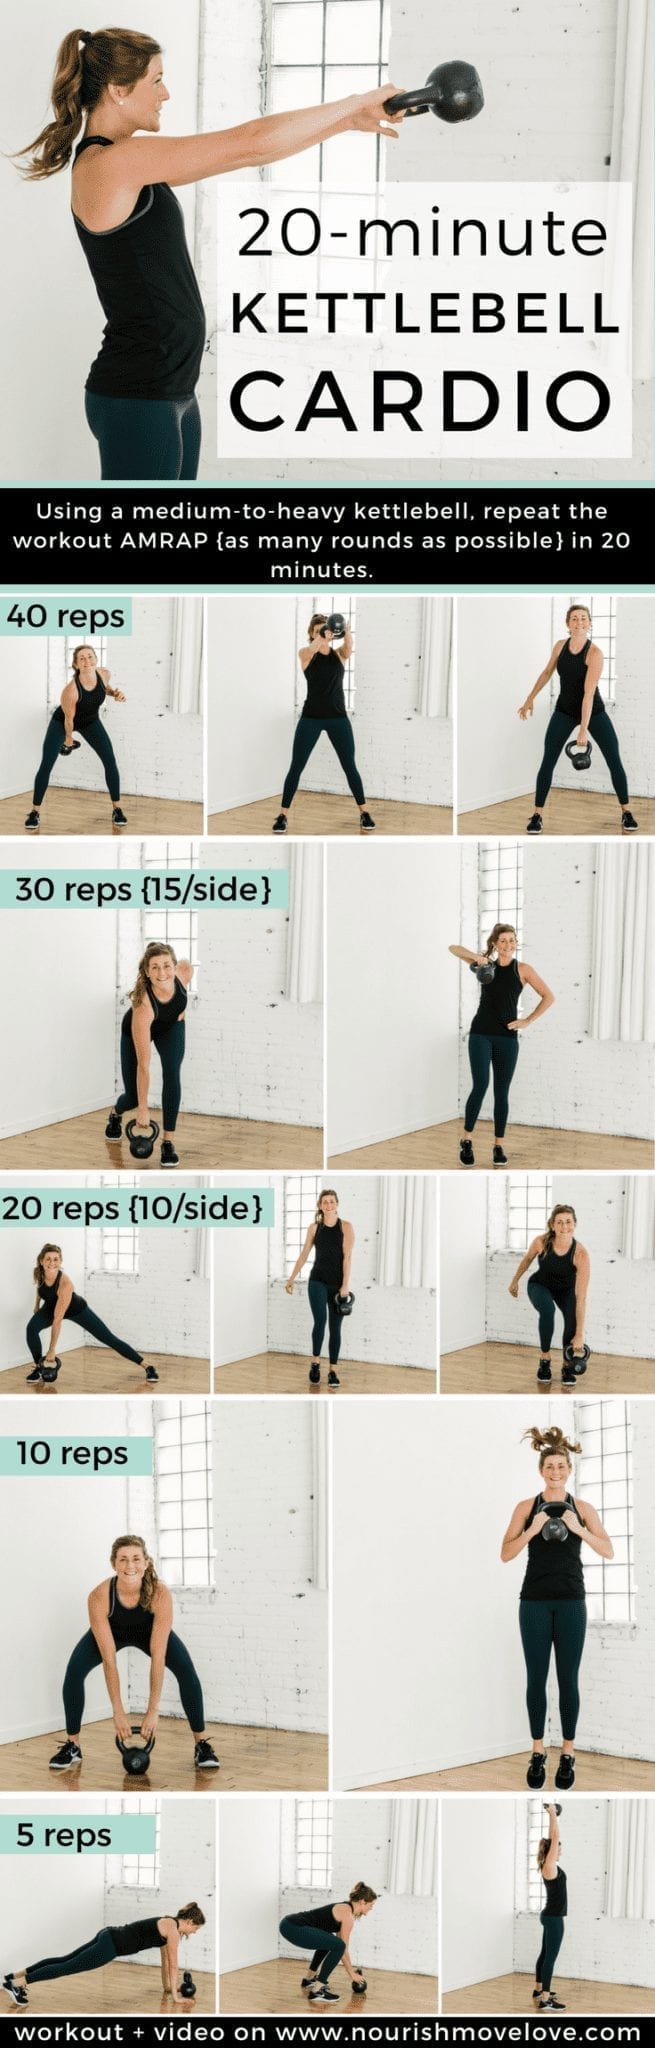 6 Day Kettlebell Workout Plan For Beginners for Gym